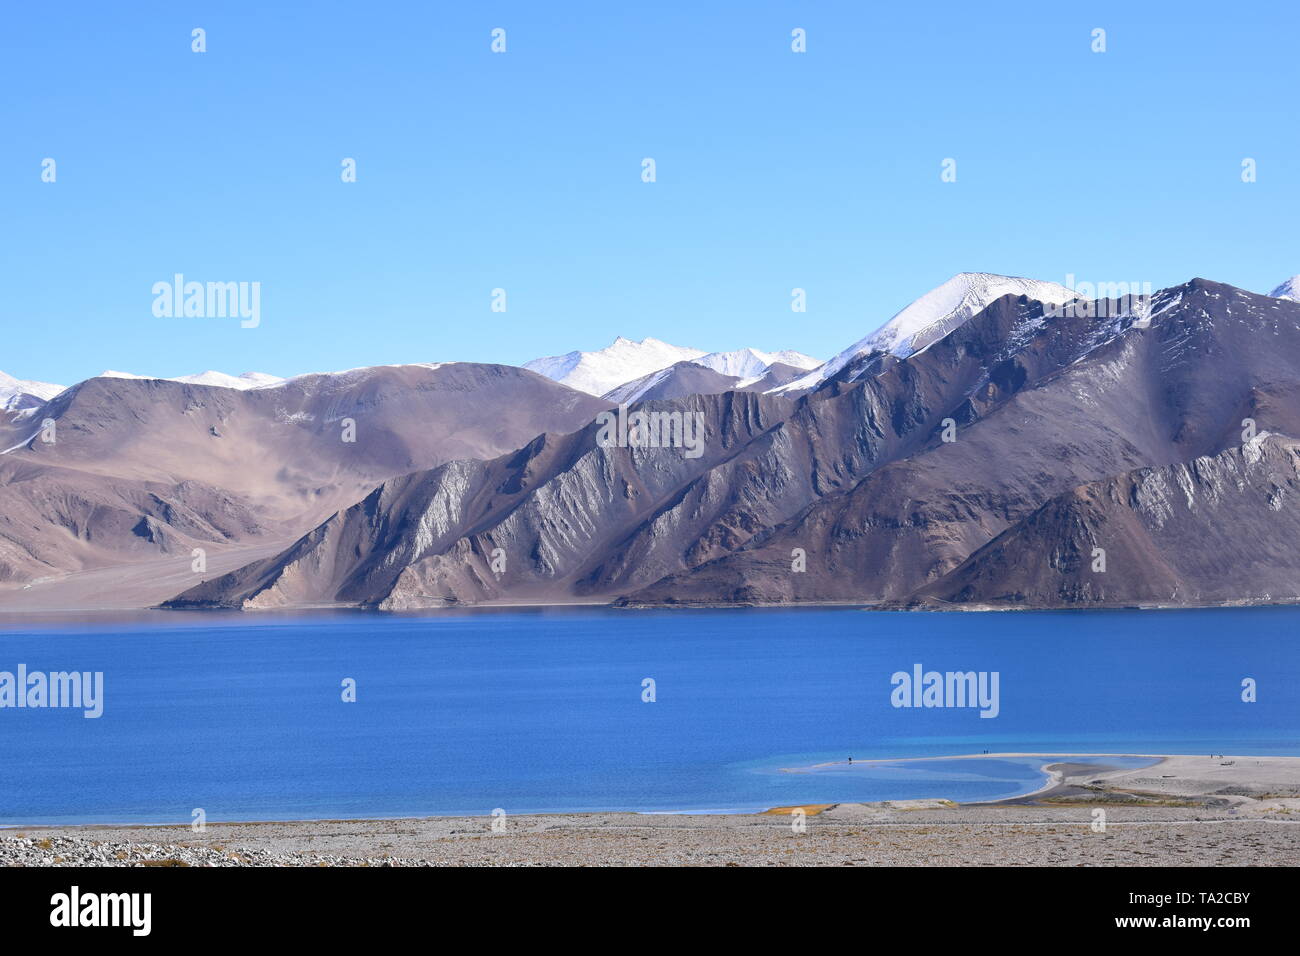 The clear blue sky made the lake totally blue and the both together looks great: A view from the Pangong Lake, Leh, India. Stock Photo